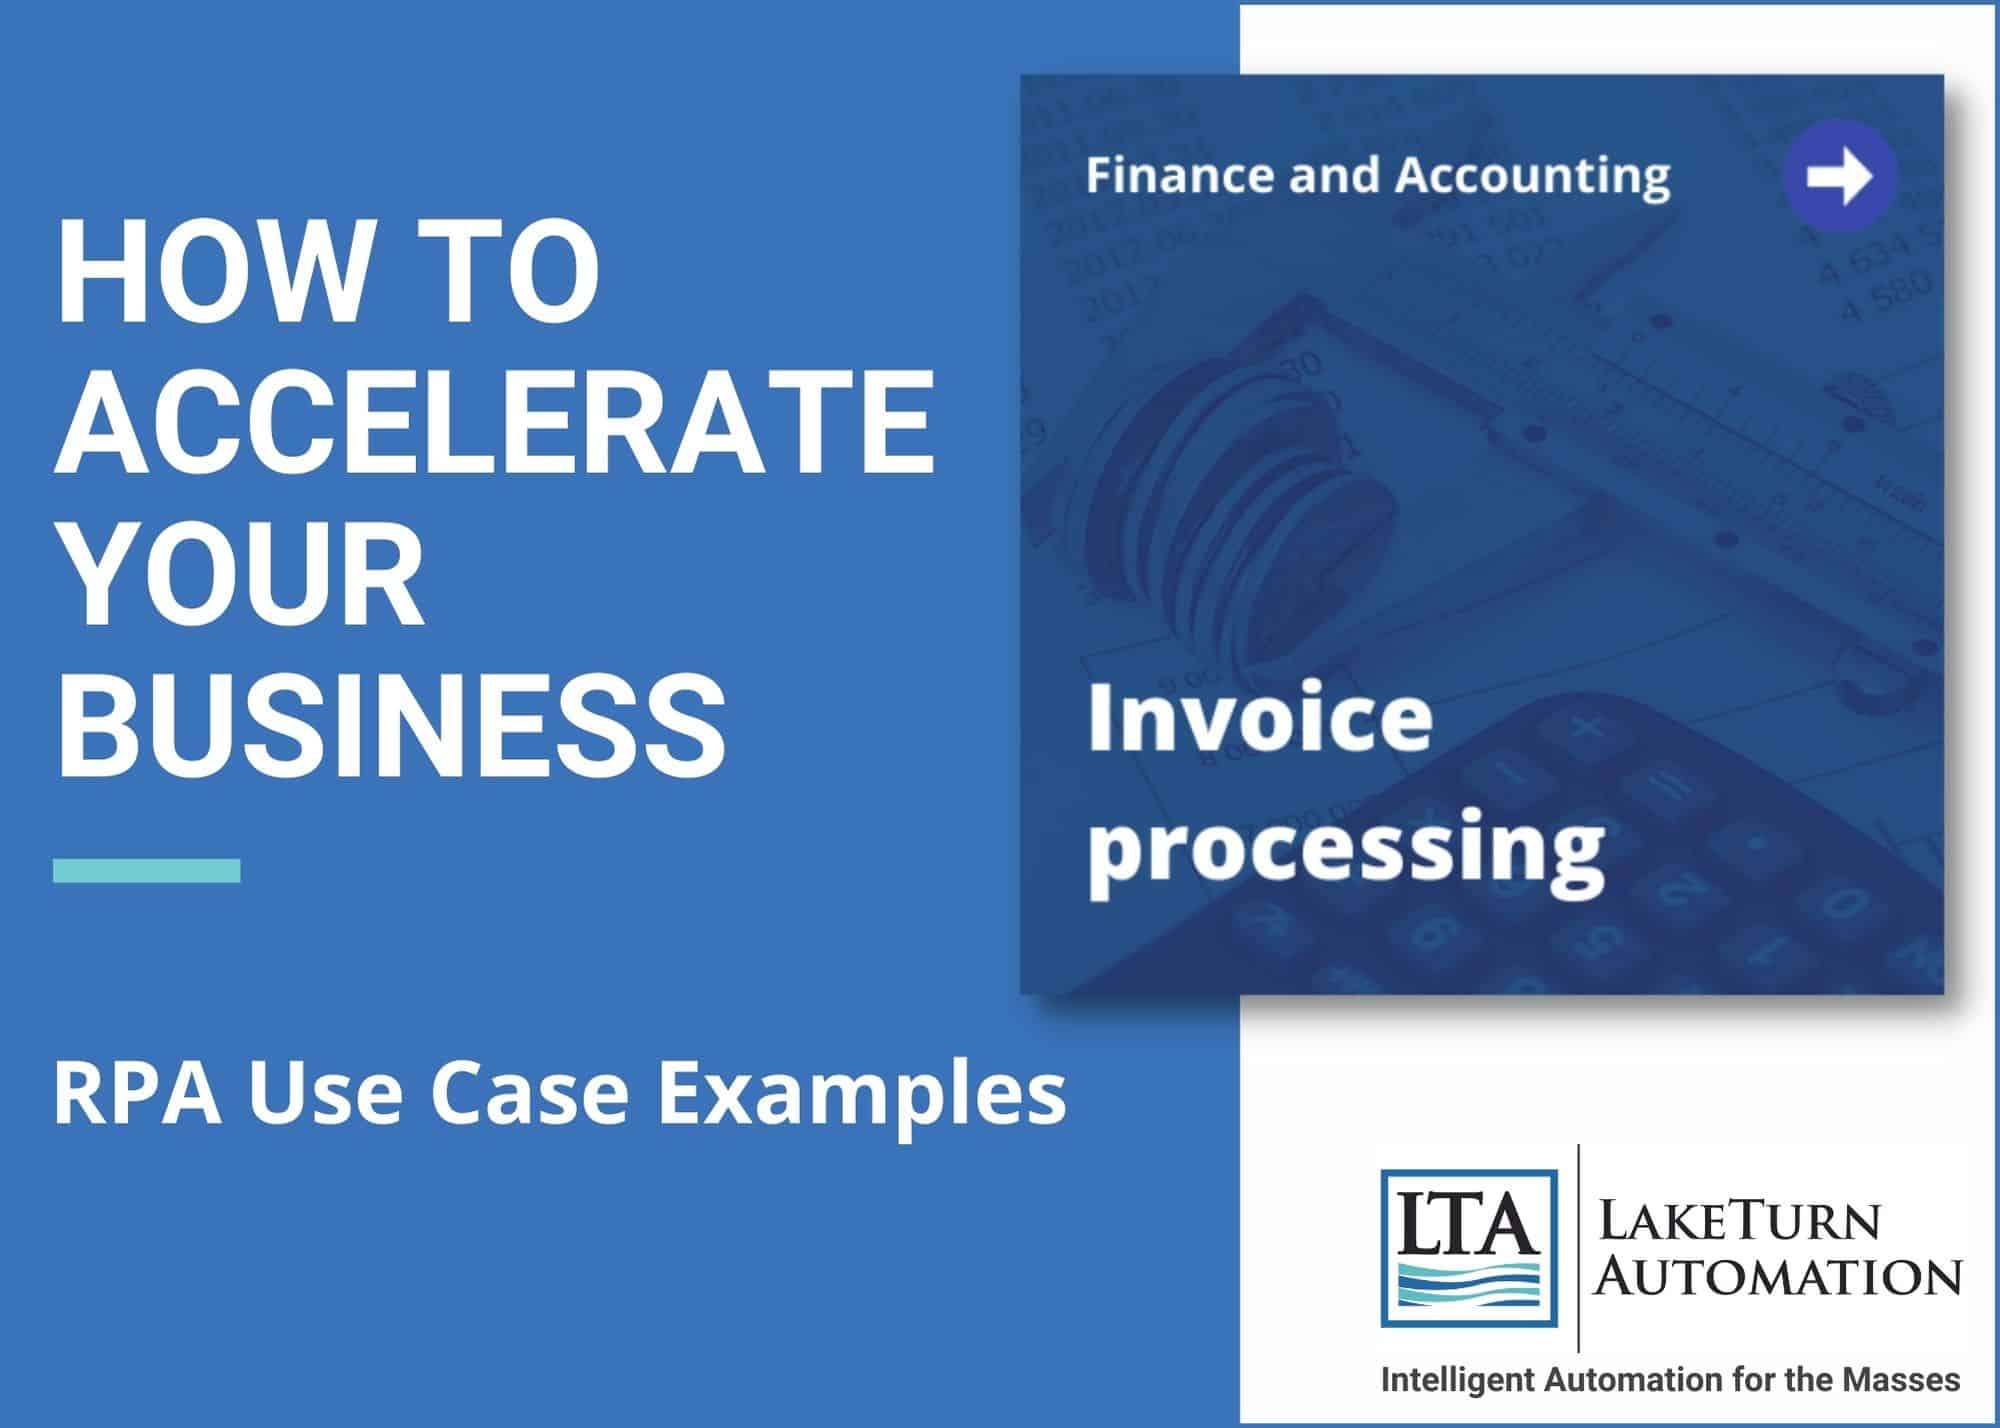 Invoice Processing Use Case